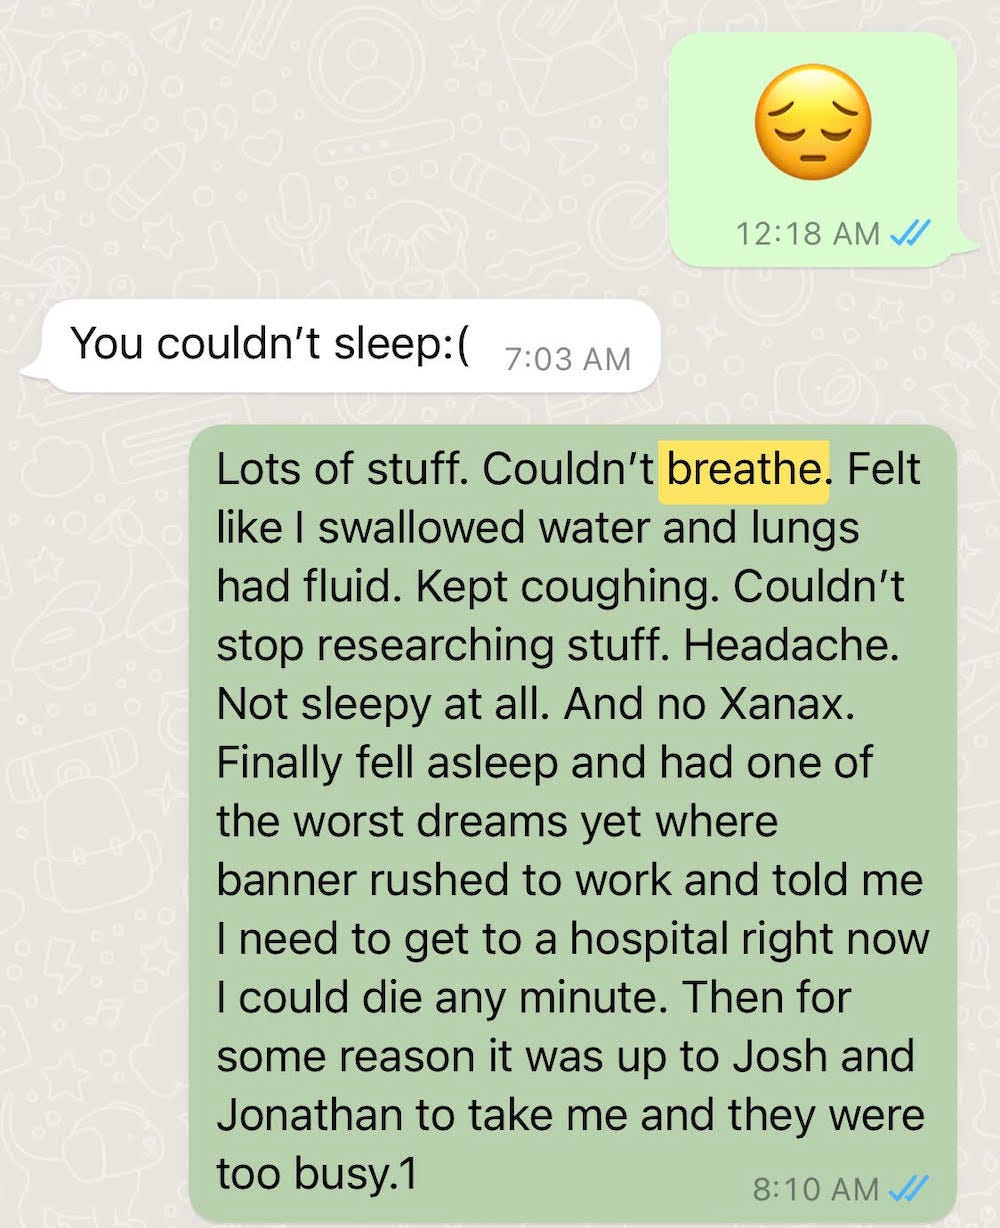 A text message from Jake describing how bad the night was dealing with anxiety and symptoms